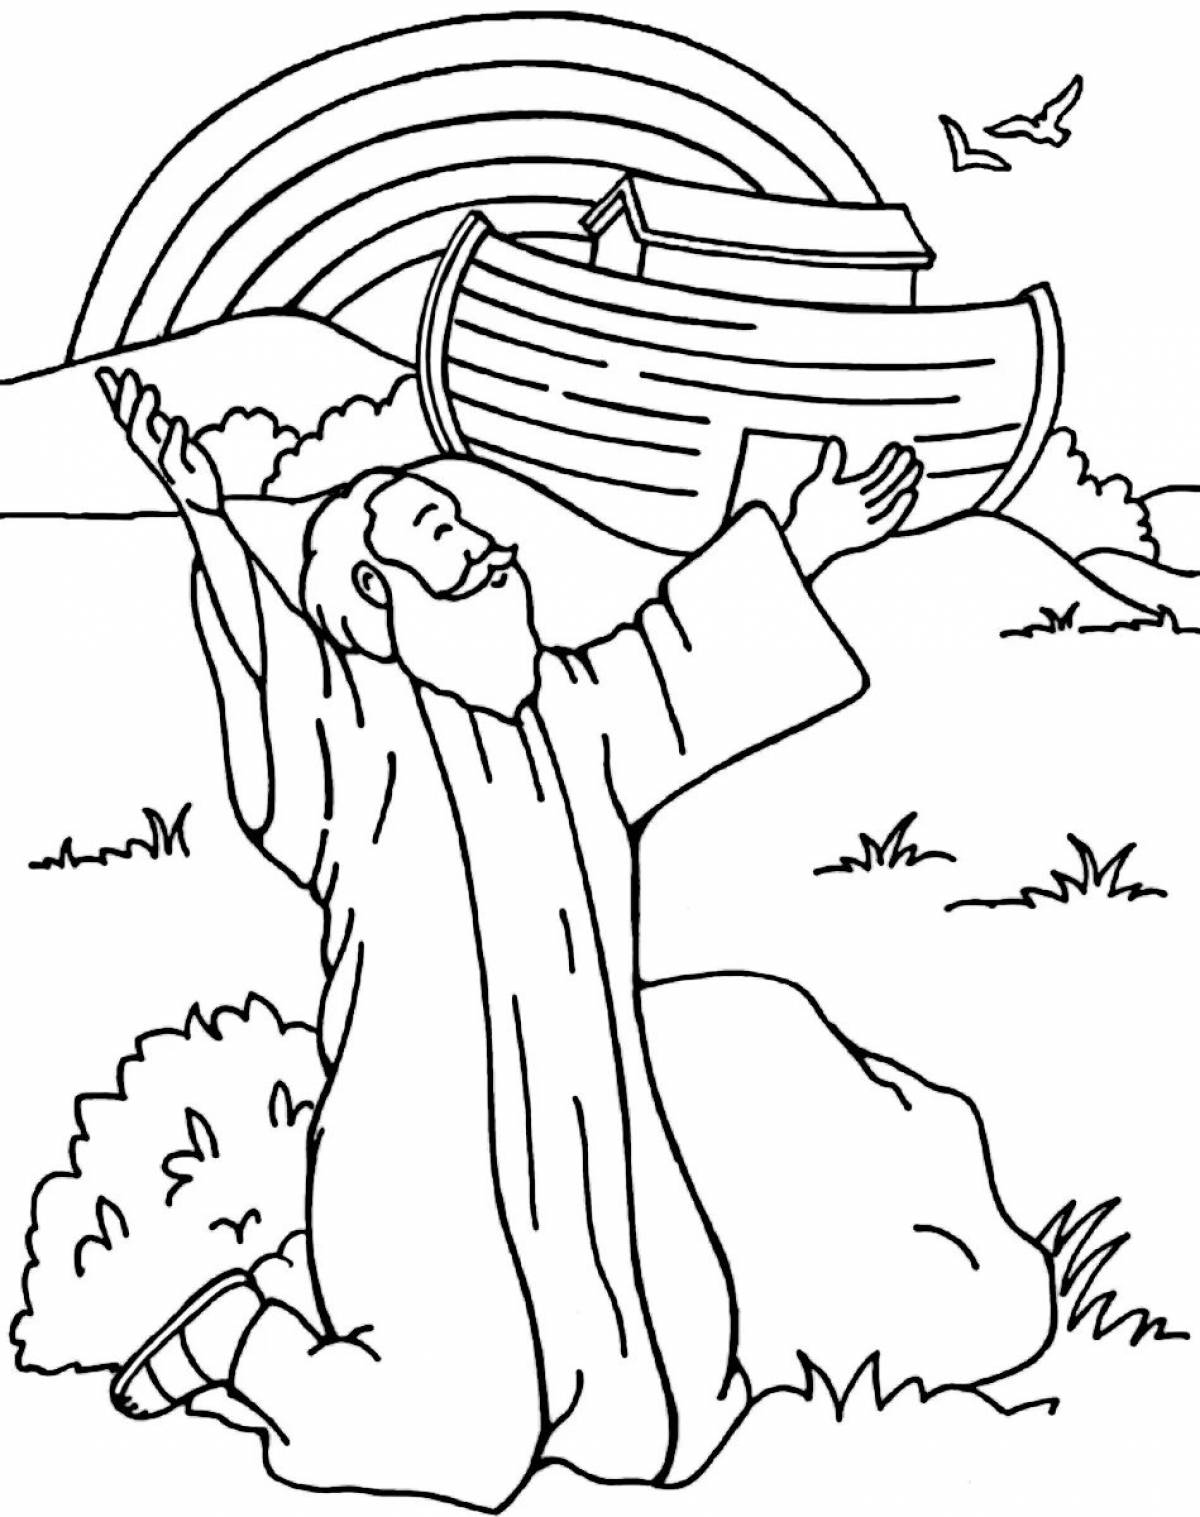 Amazing Christian coloring book for kids